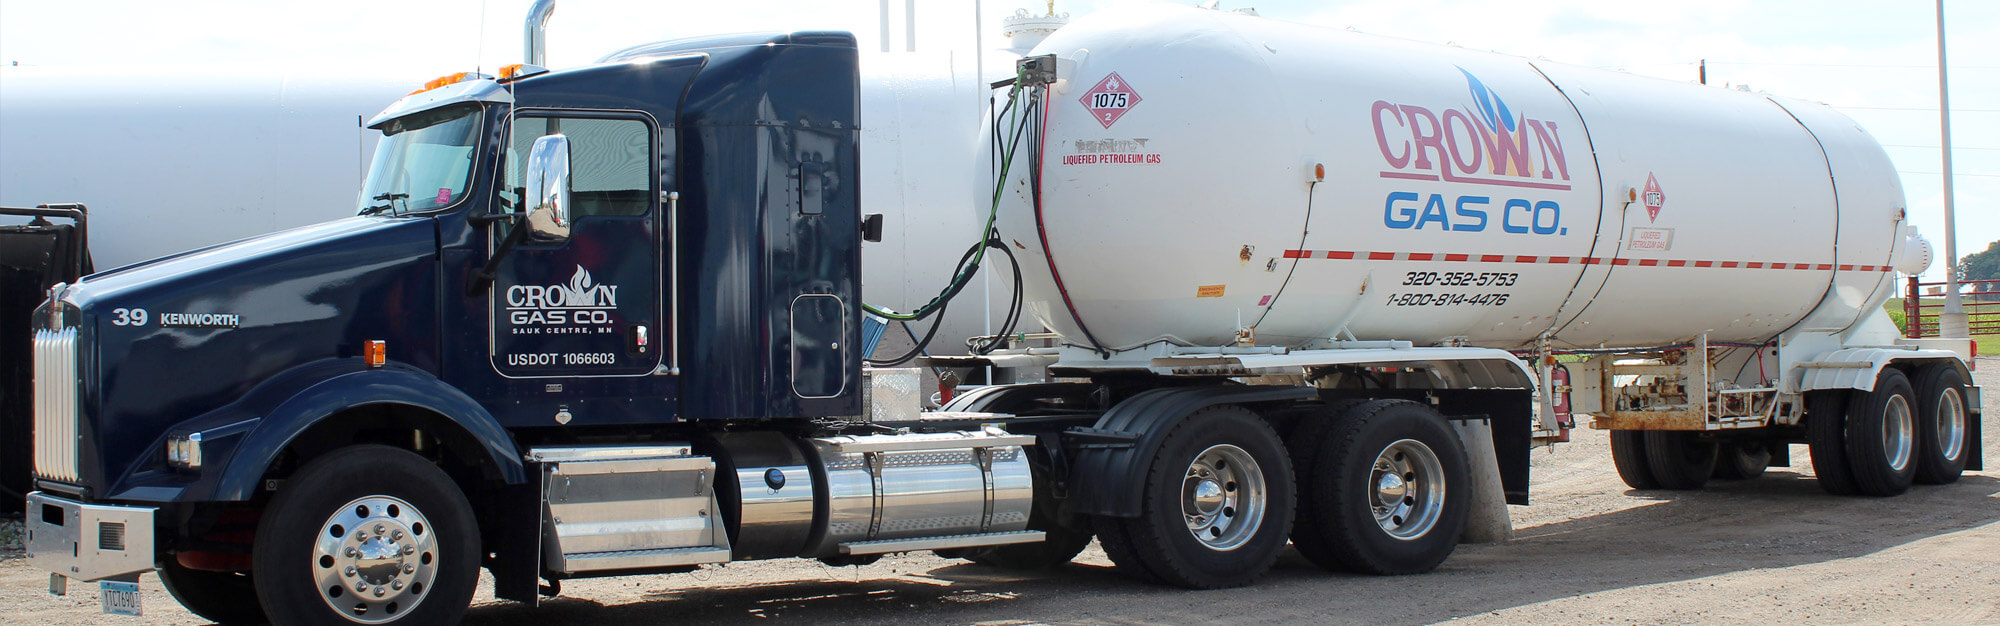 Semi-tractor pulling a large propane tank for commercial services